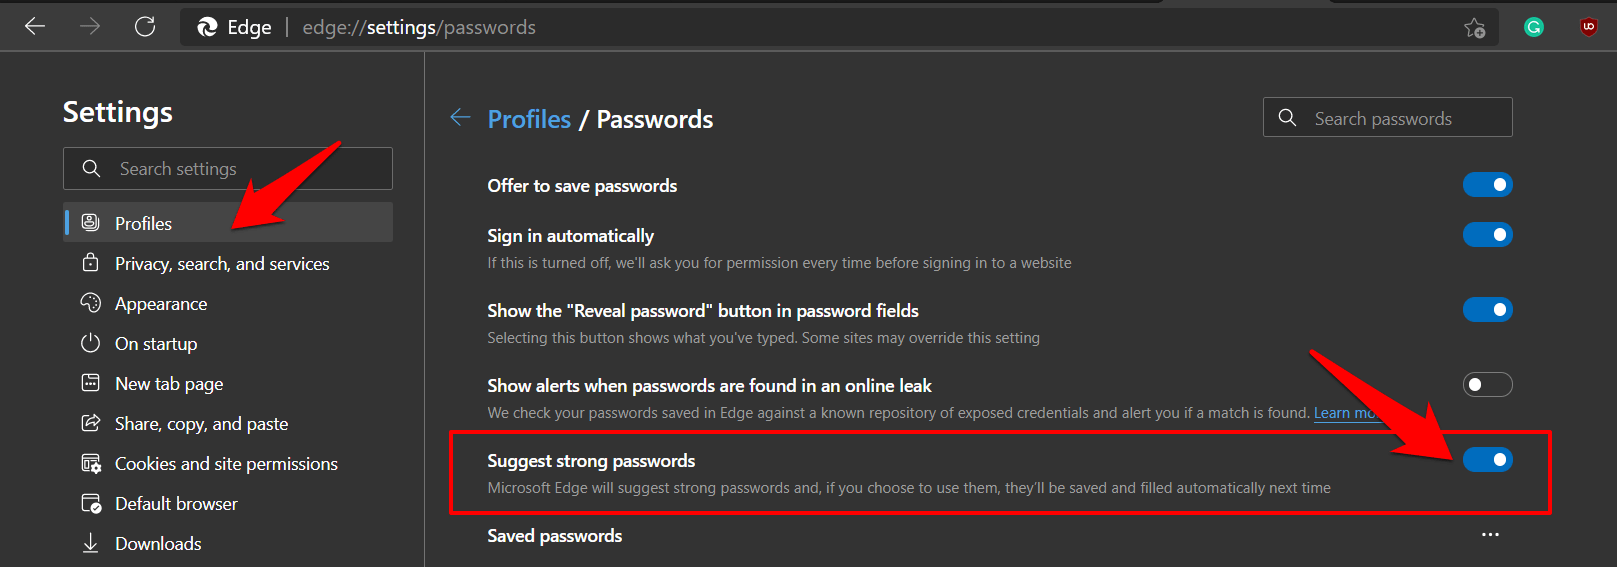 Enable toggle for strong password suggestion in Edge